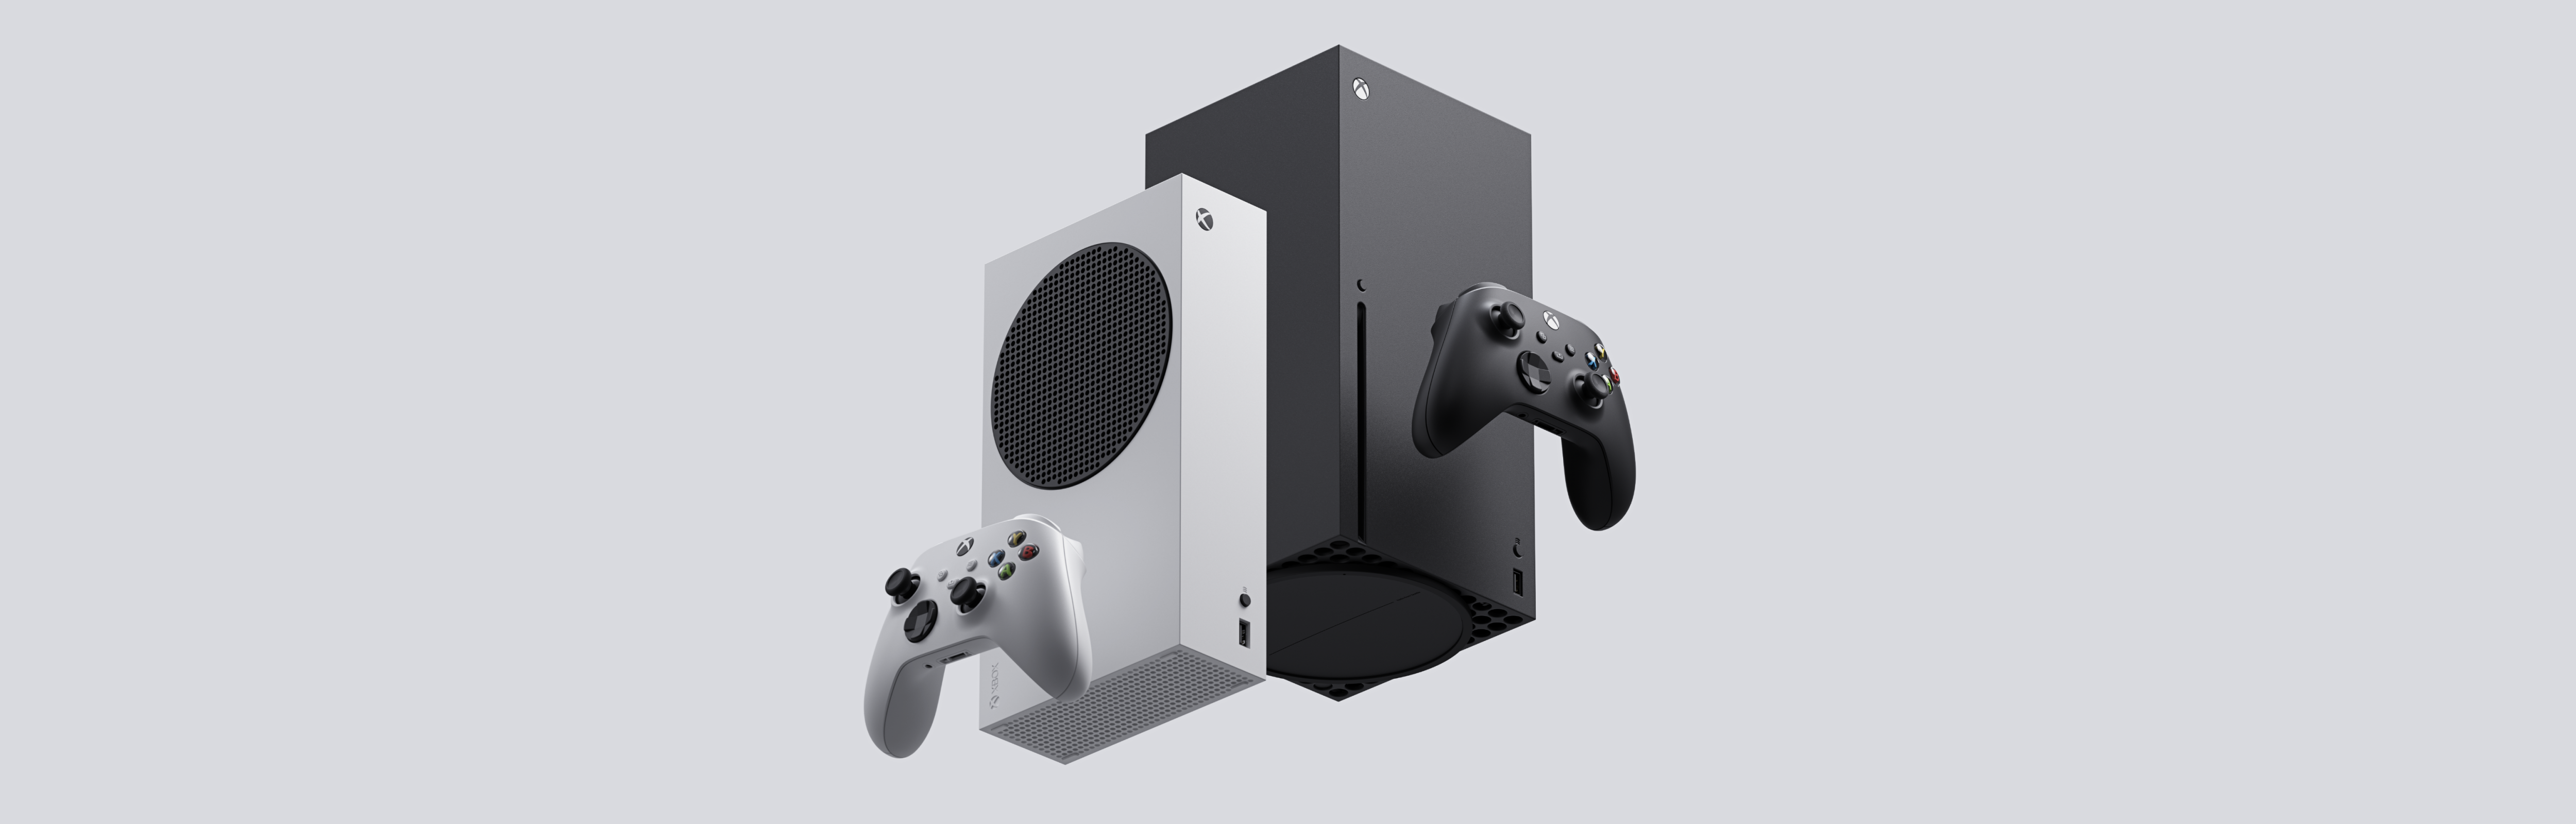 Behind the Design: Xbox Series X and Xbox Series S | by Joline Tang |  Microsoft Design | Medium